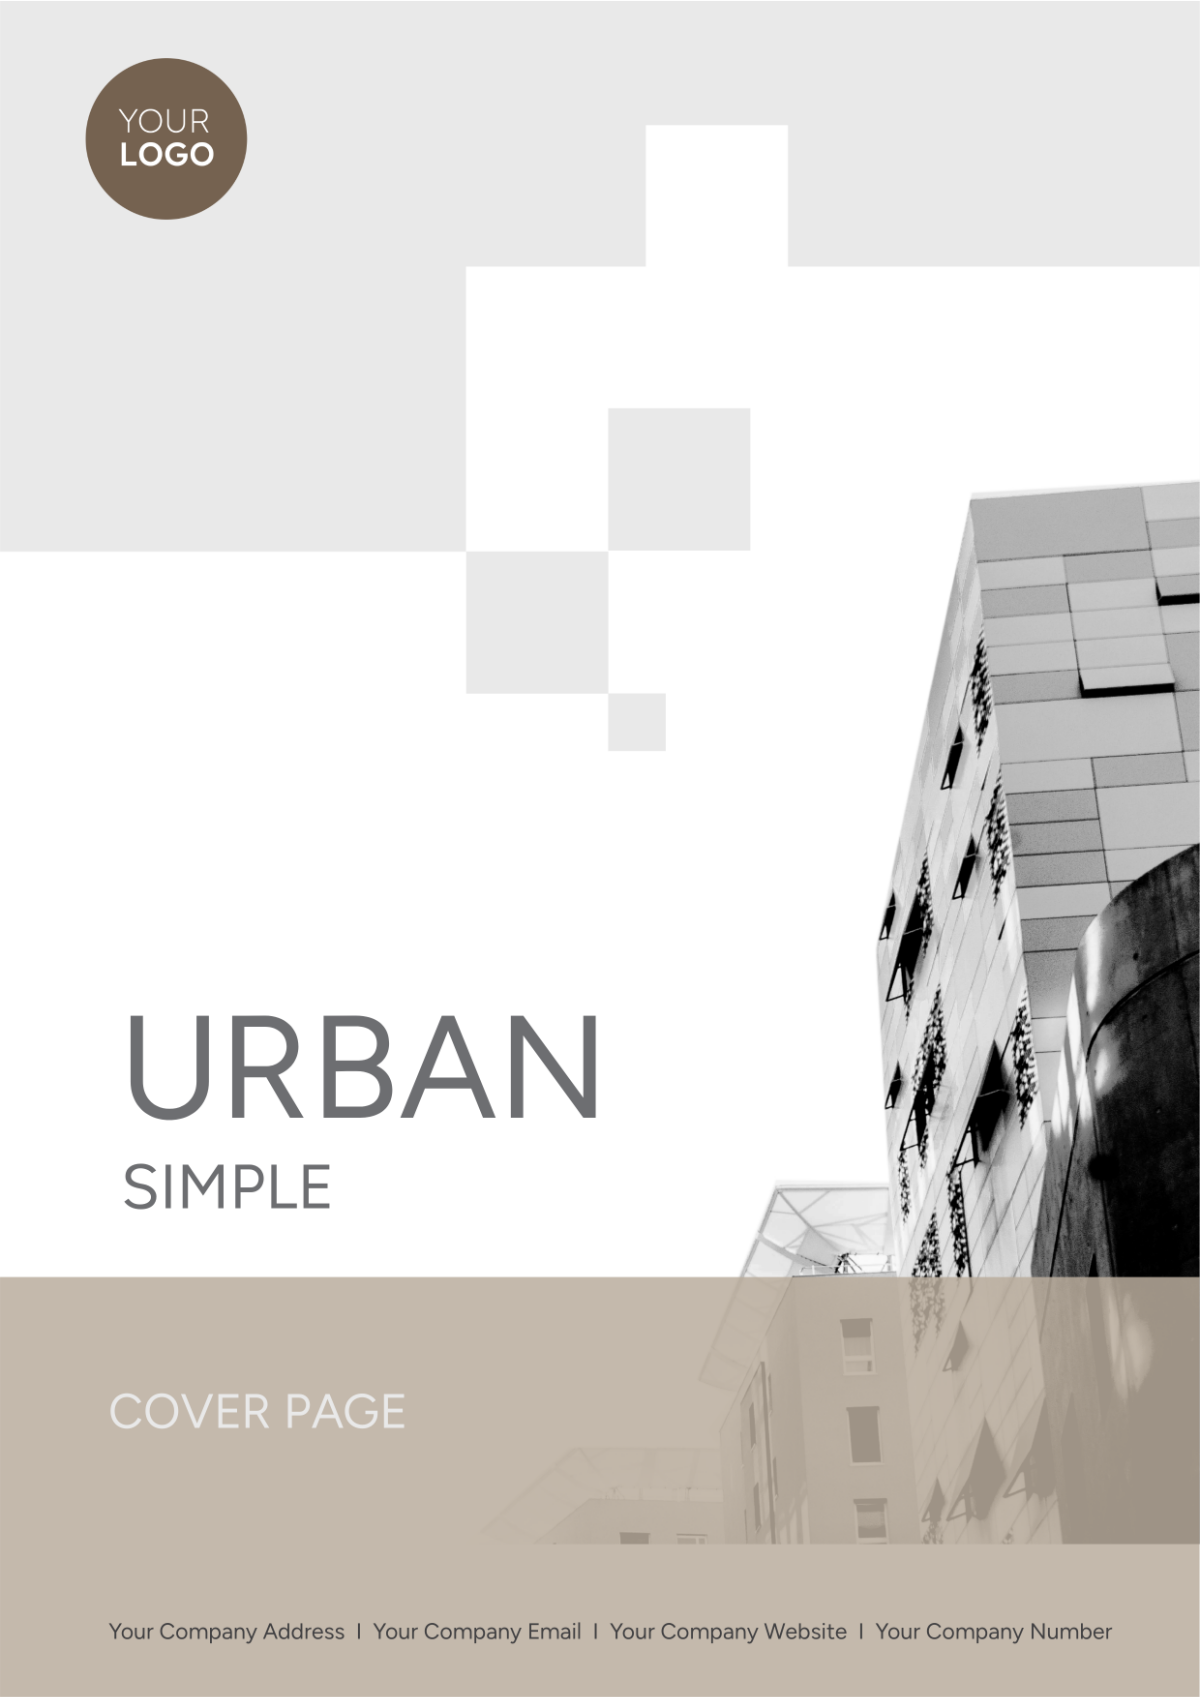 Urban Simple Cover Page